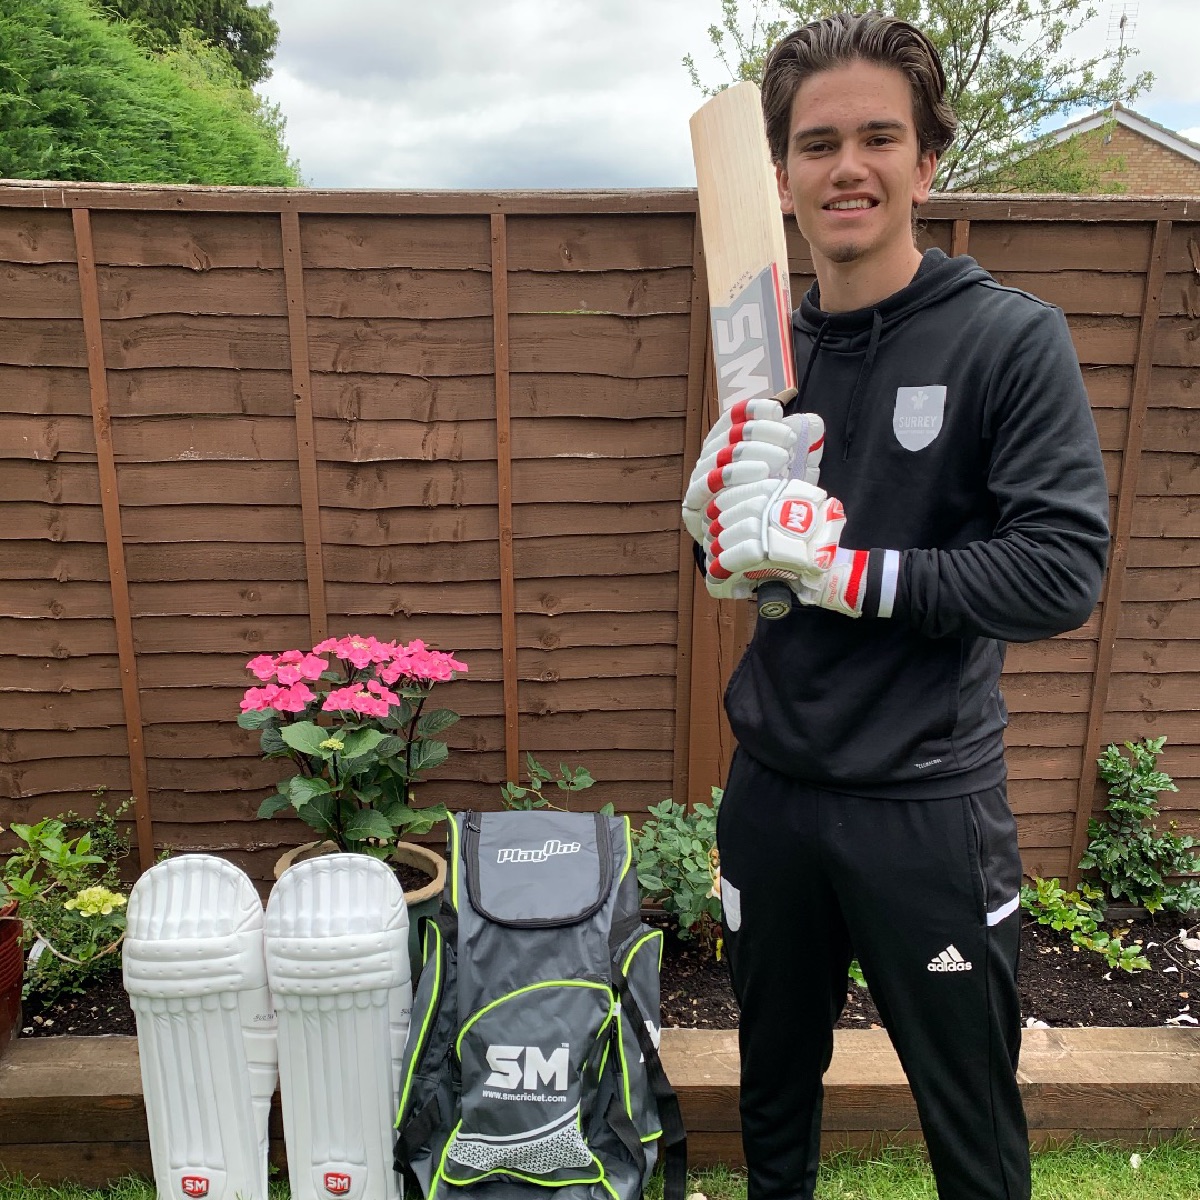 Please say hello to our newest Sponsored player, @AlfieWinter4!

Here's what he had to say: 'I am very excited to be teaming up with SM. My first impressions of the kit are great and I can’t wait to use their equipment for the upcoming season’.🏏

#smfamily #sponsorshipdeal